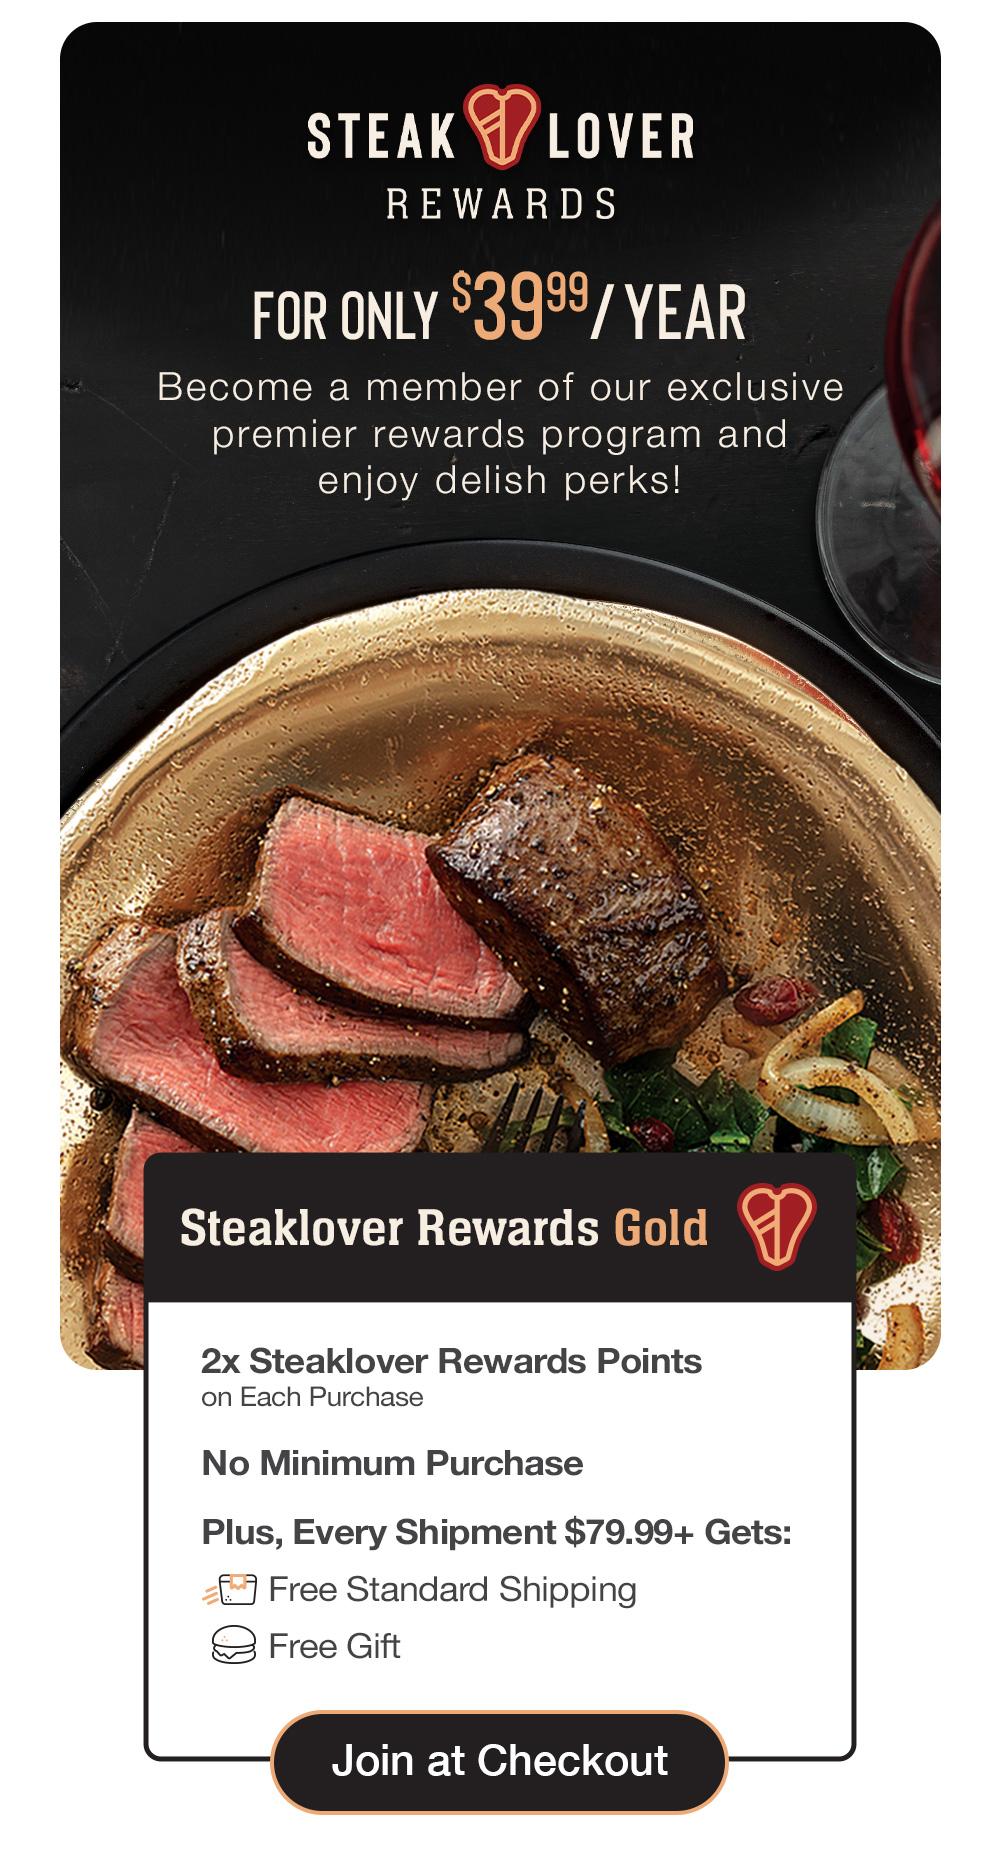 steaklover REWARDS | FOR ONLY $39.99/YEAR - Become a member of our exclusive premier rewards program and delish perks! | Steaklover Rewards Gold - 2x Steaklover Rewards Points on Each Purchase - No Minimum Purchase - Plus, Every Shipment $79.99+ Gets: Free Standard Shipping - Free Gift || Join at Checkout